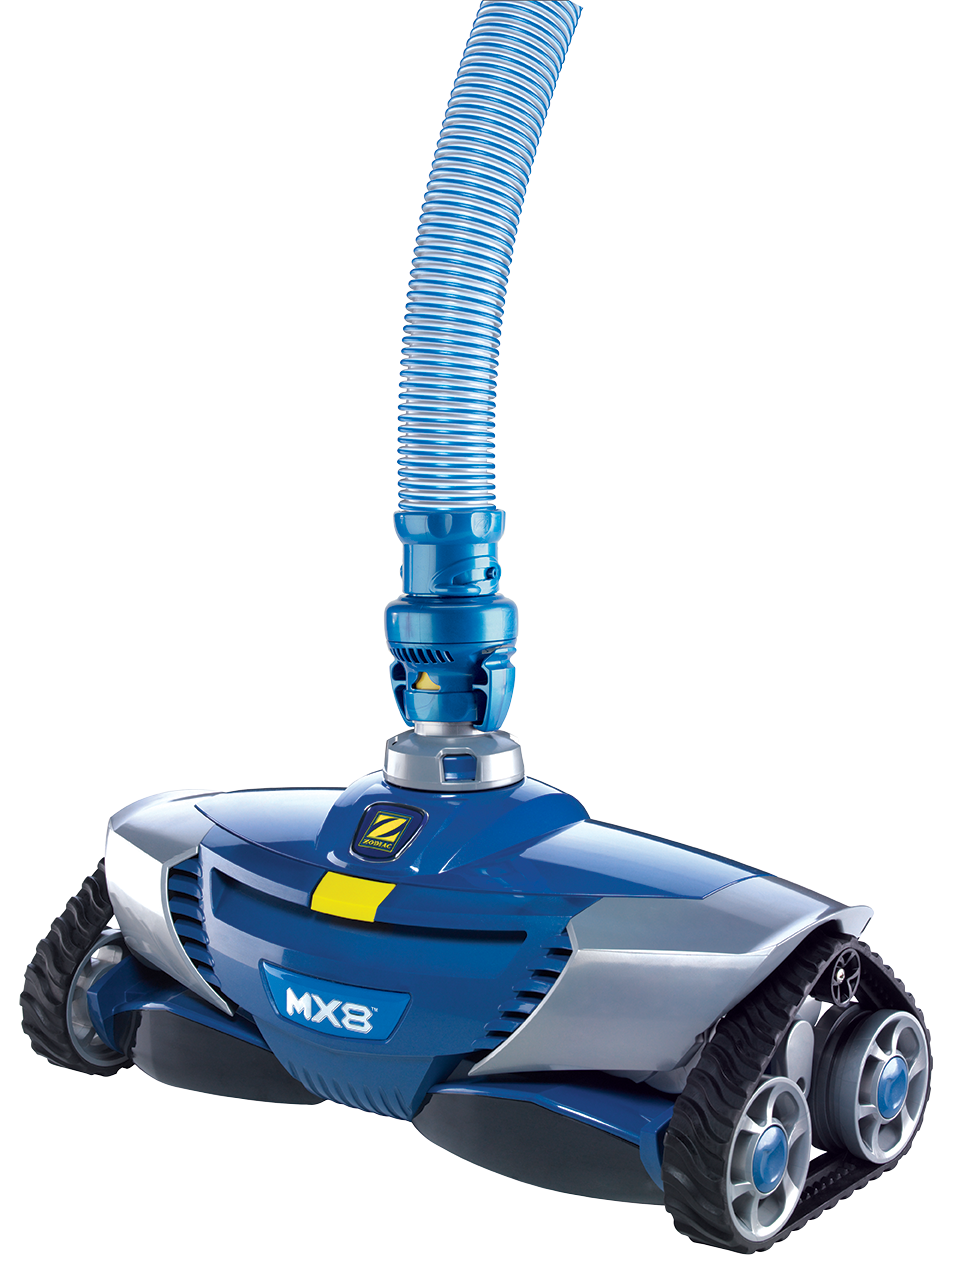 Zodiac MX8 suction cleaner for inground pools